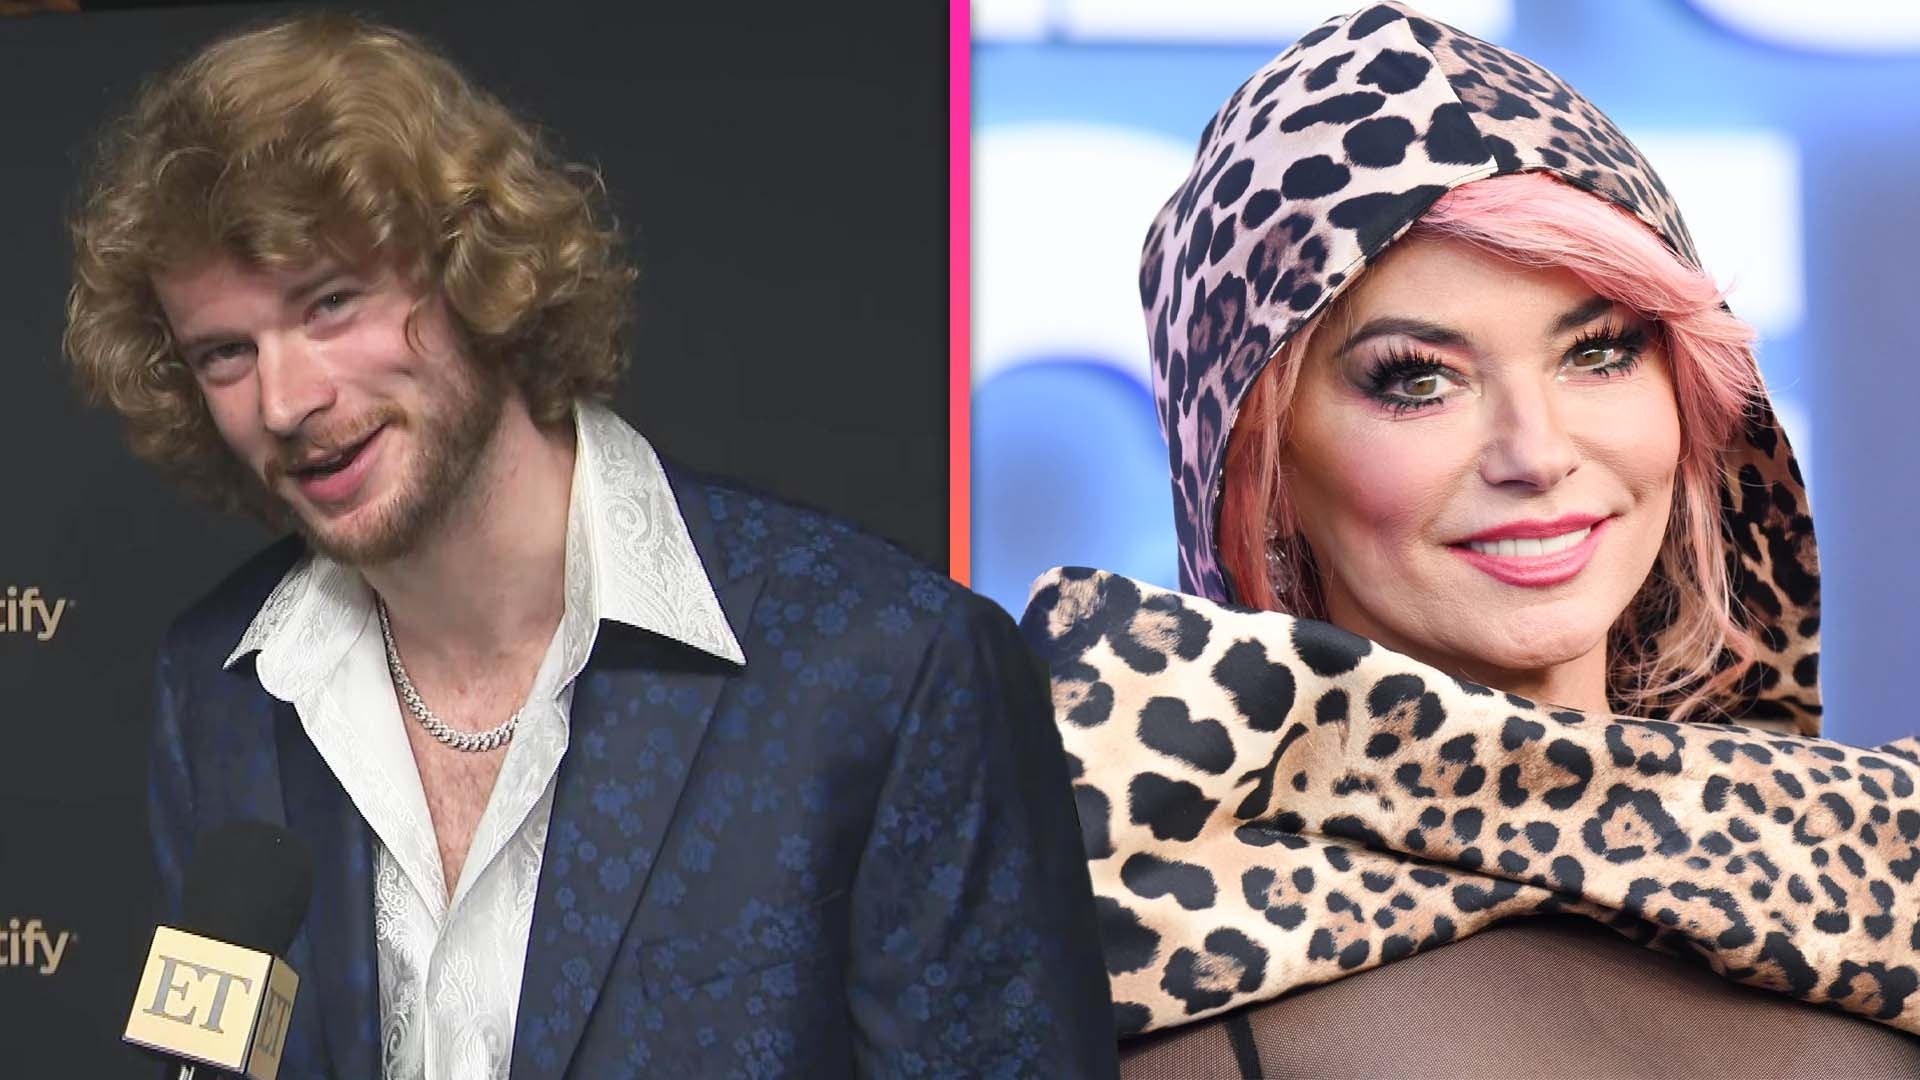 Yung Gravy Explains Bond With Shania Twain and Teases Future Music Collab (Exclusive)